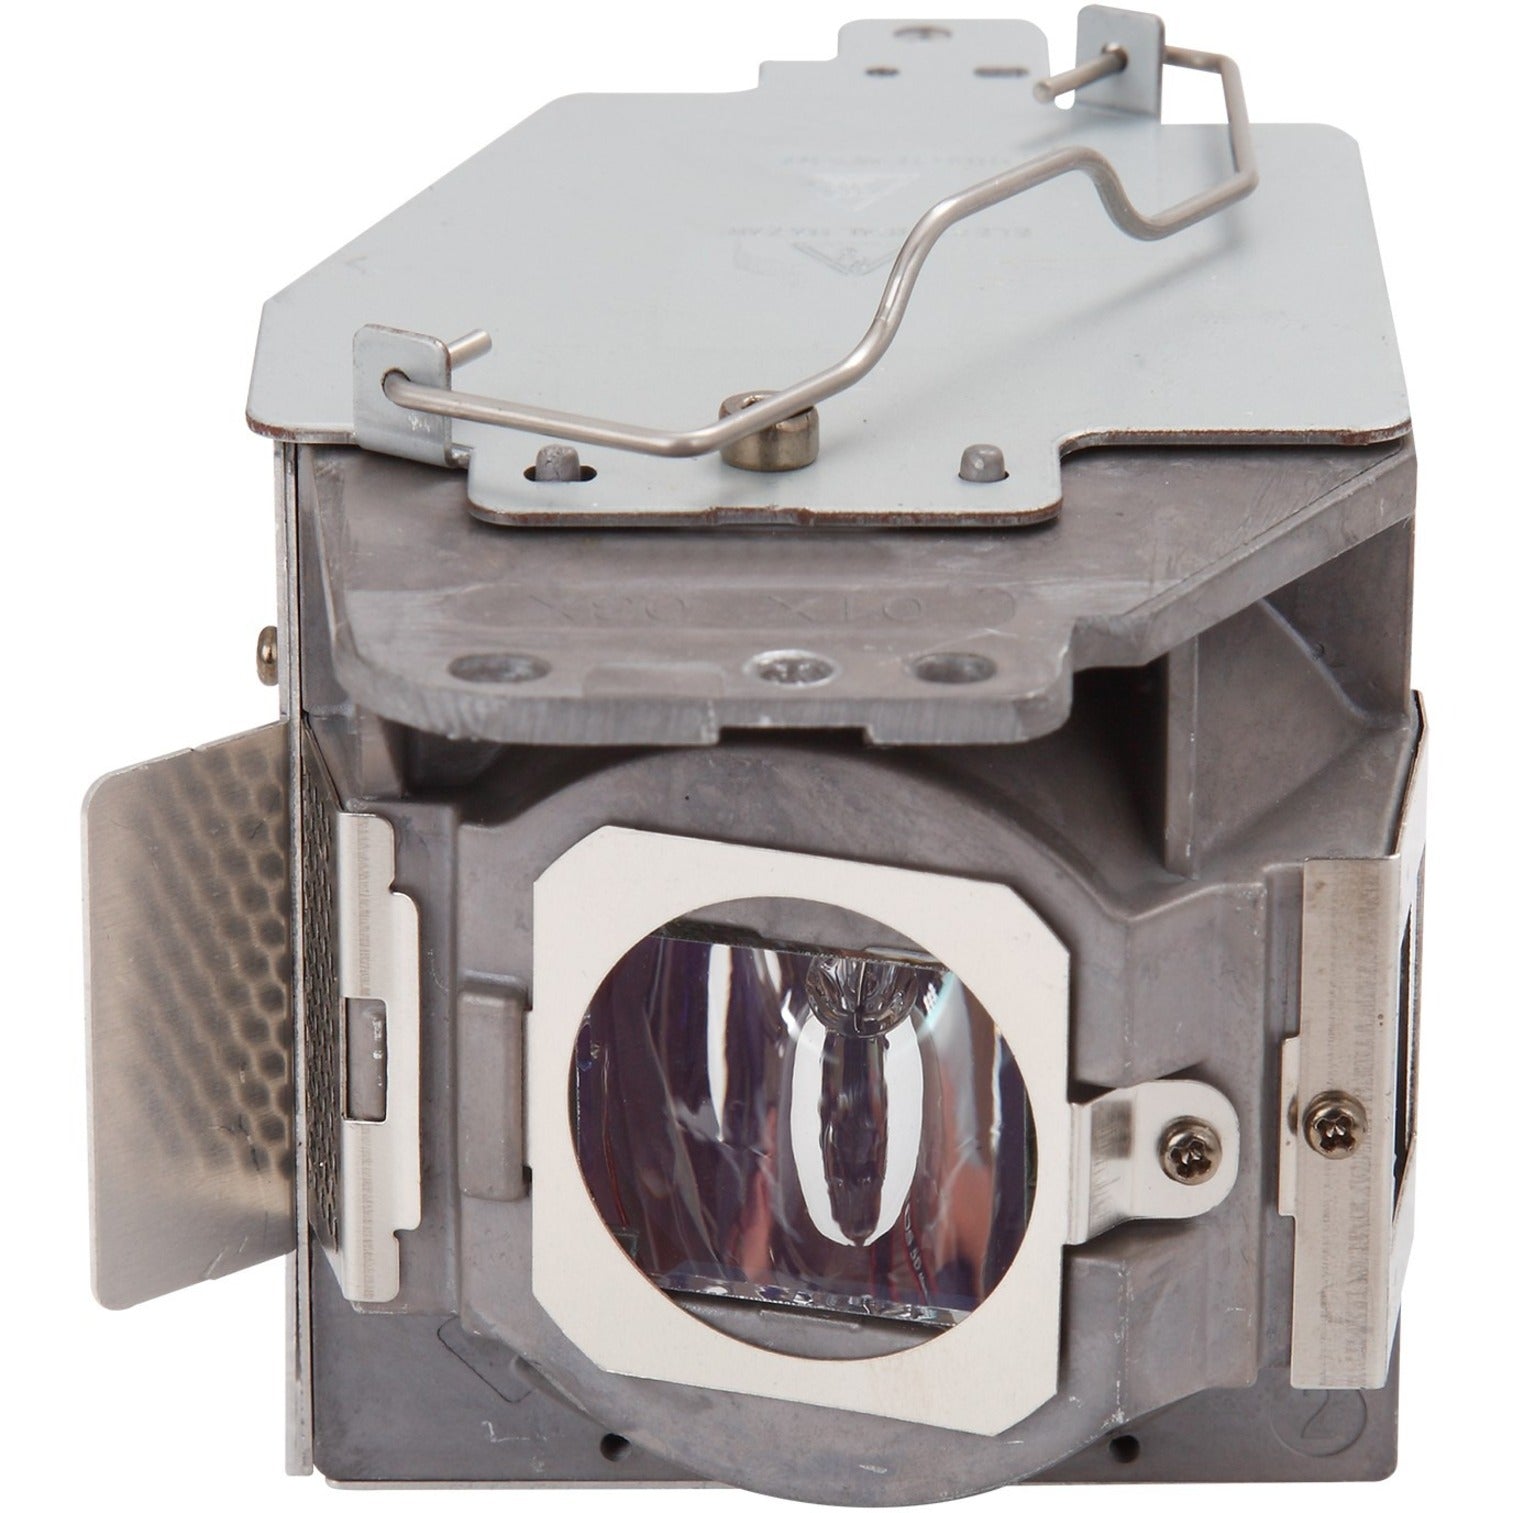 ViewSonic RLC-078 Projector Lamp - High-Quality Replacement for PJD6235 and PJD6245 Projectors